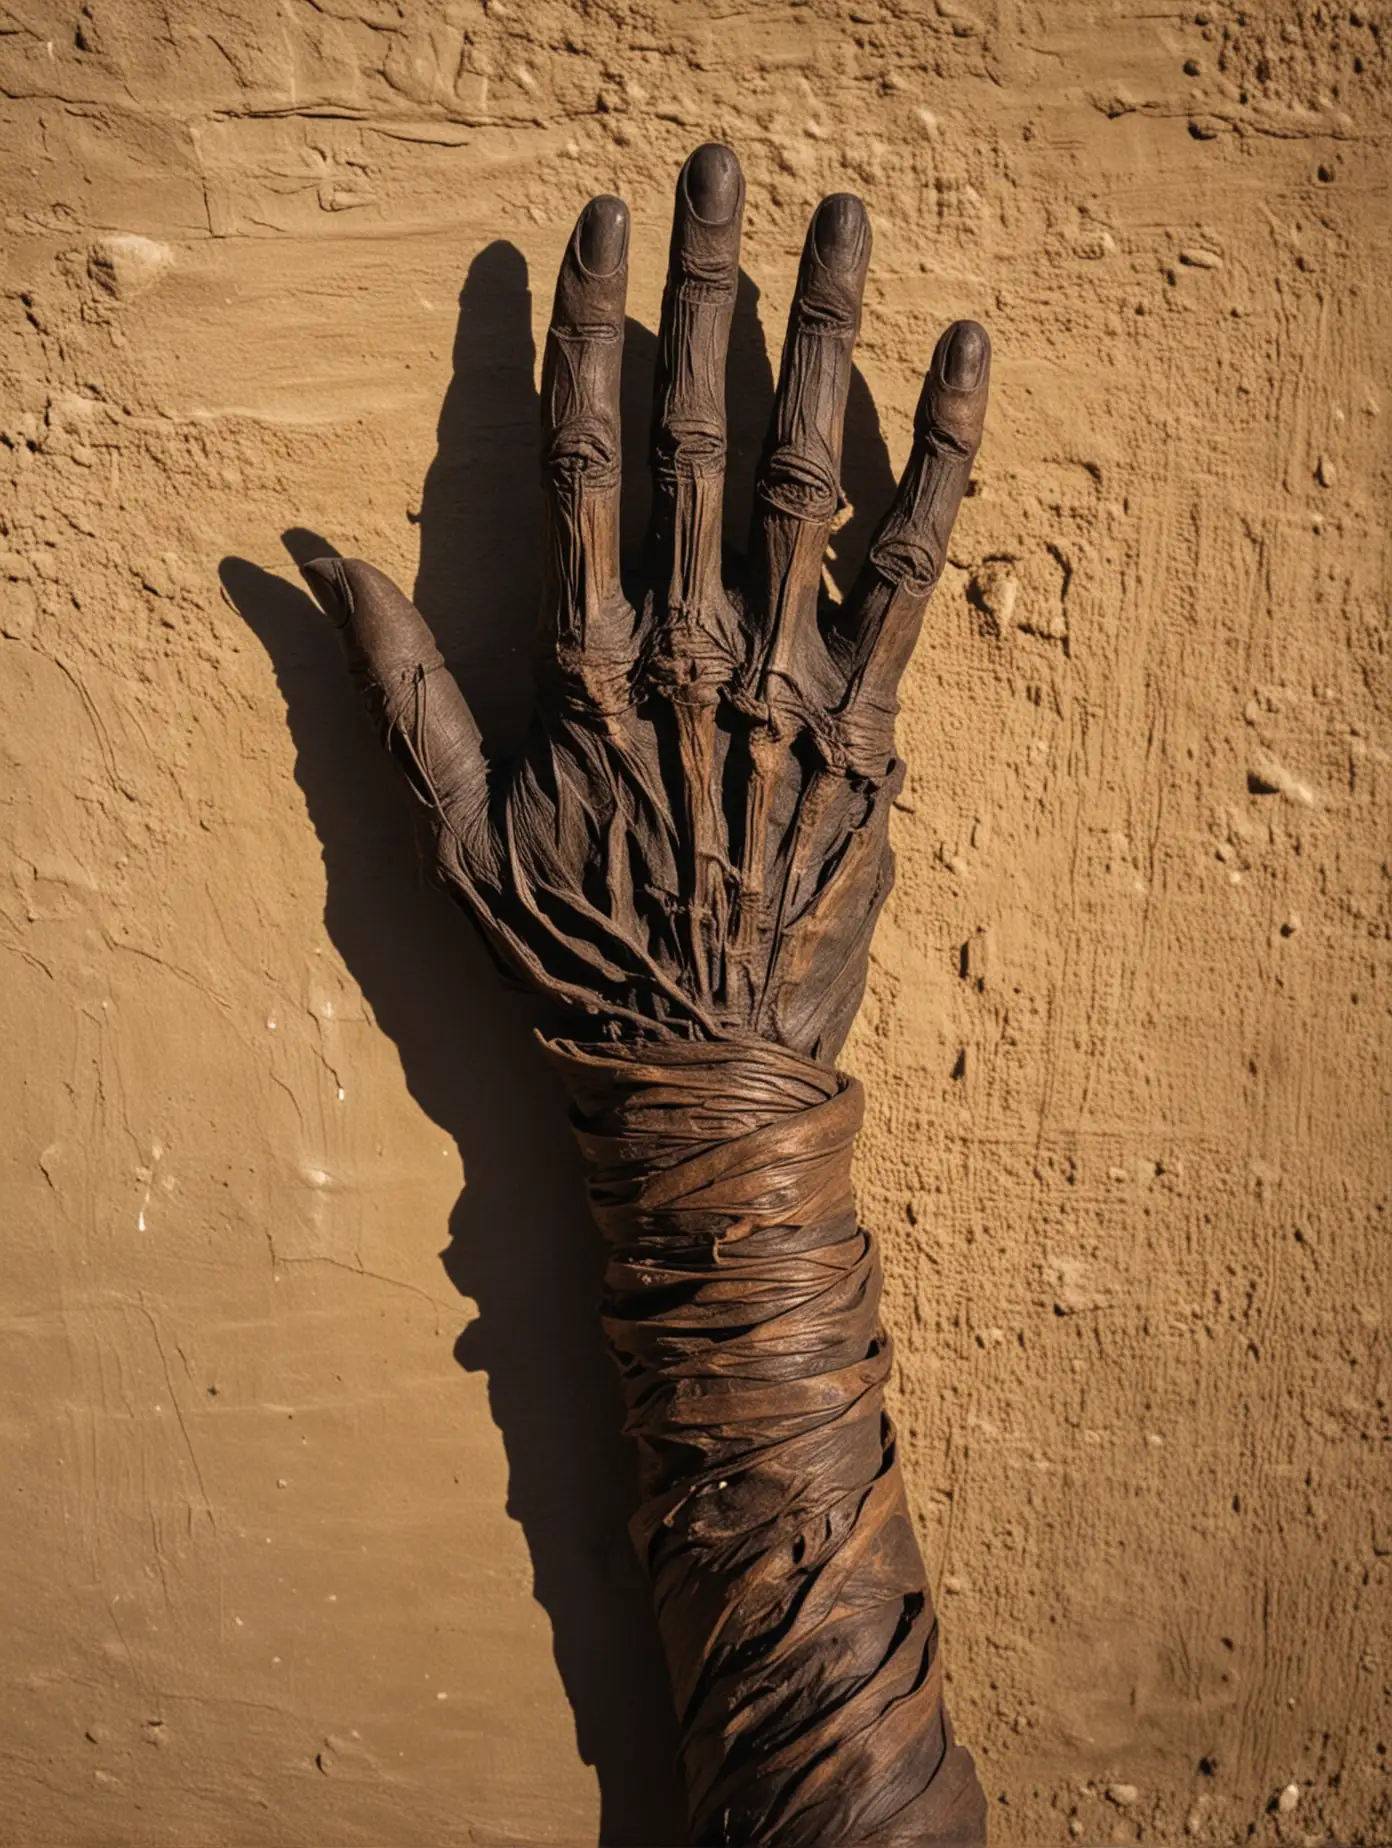 Mummified Hand Casting Eerie Shadow of a House